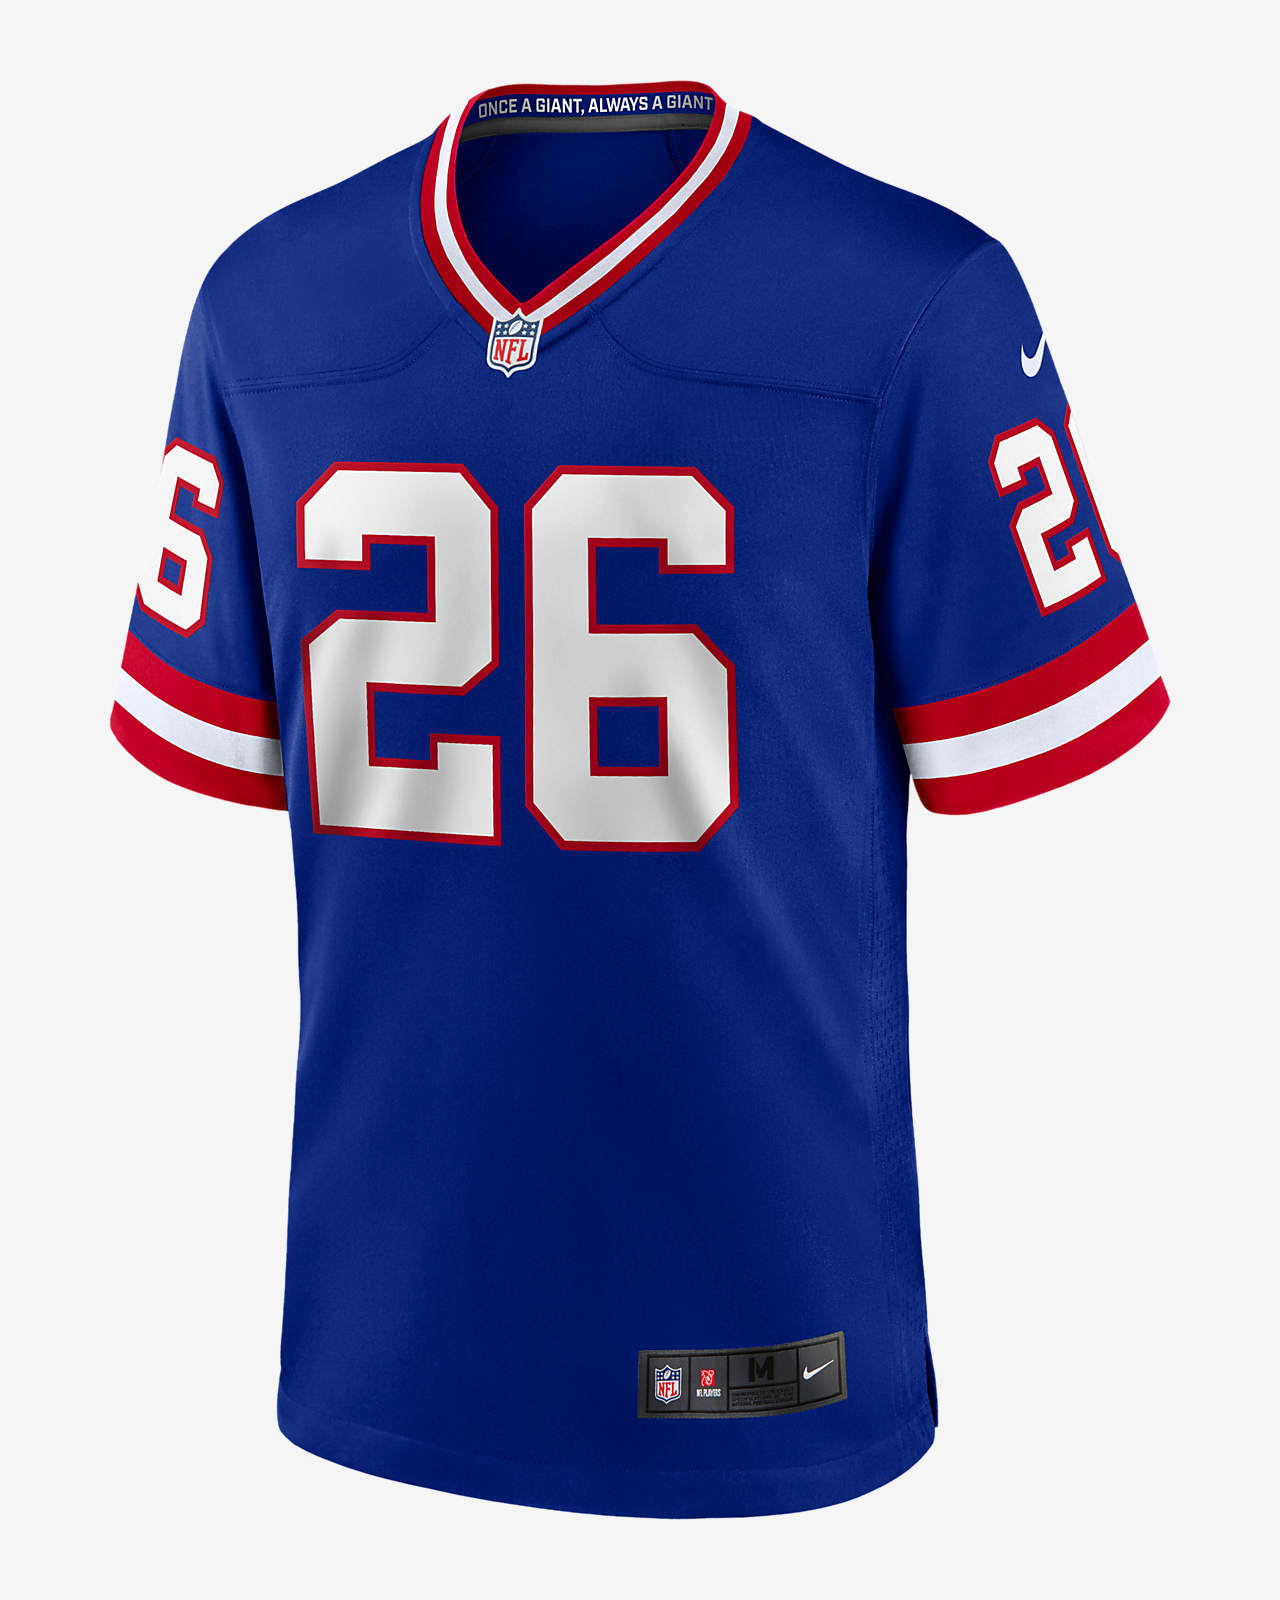 Men's Nike Leonard Williams Royal New York Giants Classic Player Game Jersey Size: Small